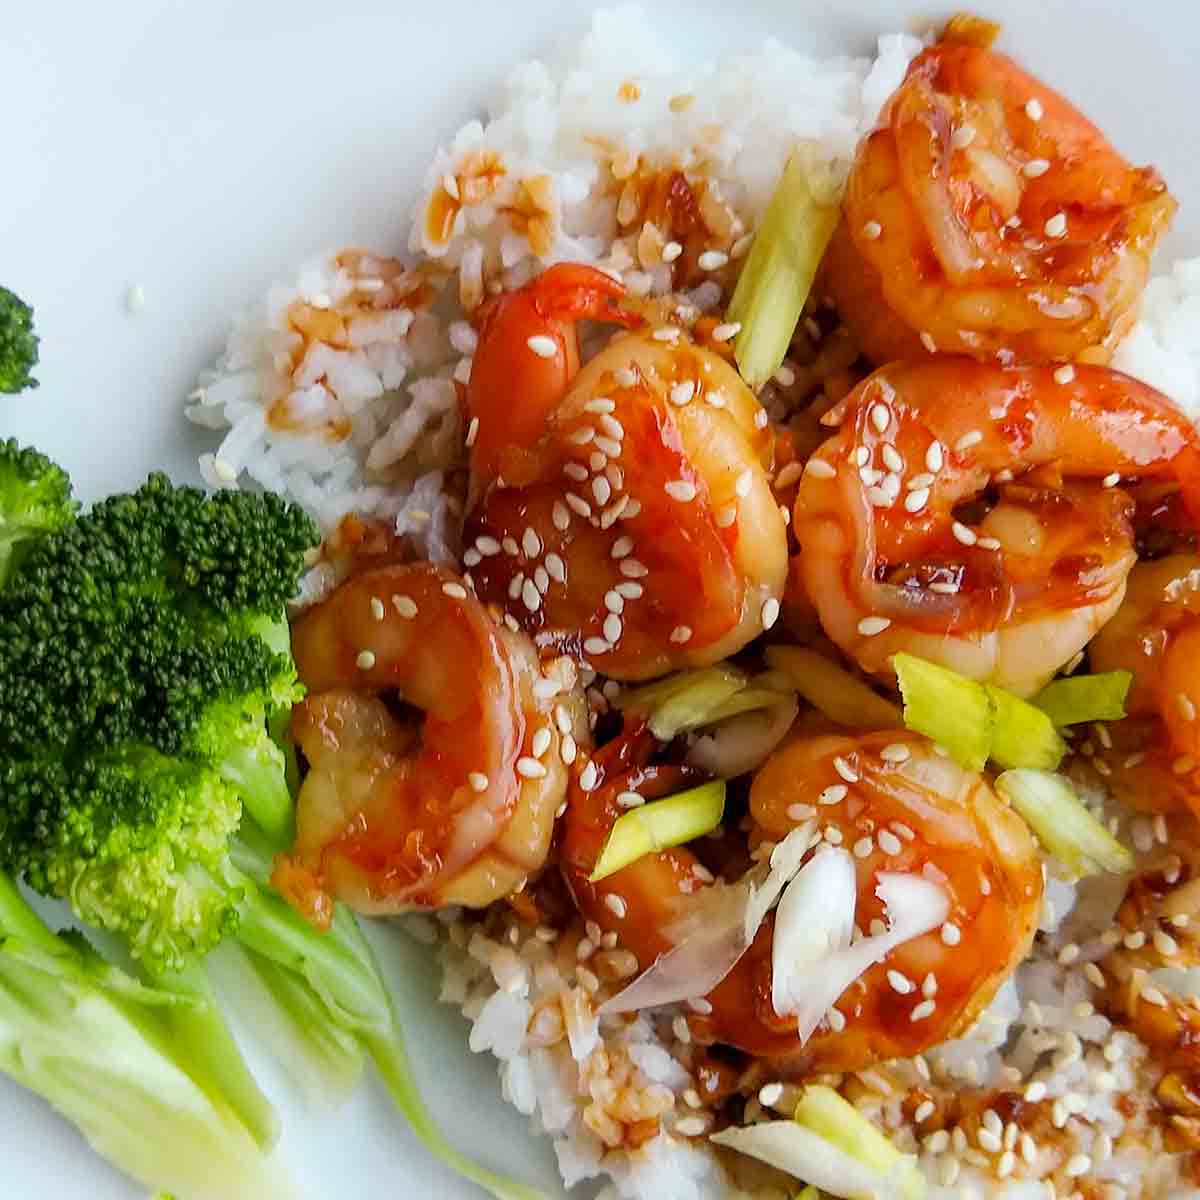 Glazed shrimp on white rice, topped with scallions, and steamed broccoli on the side.